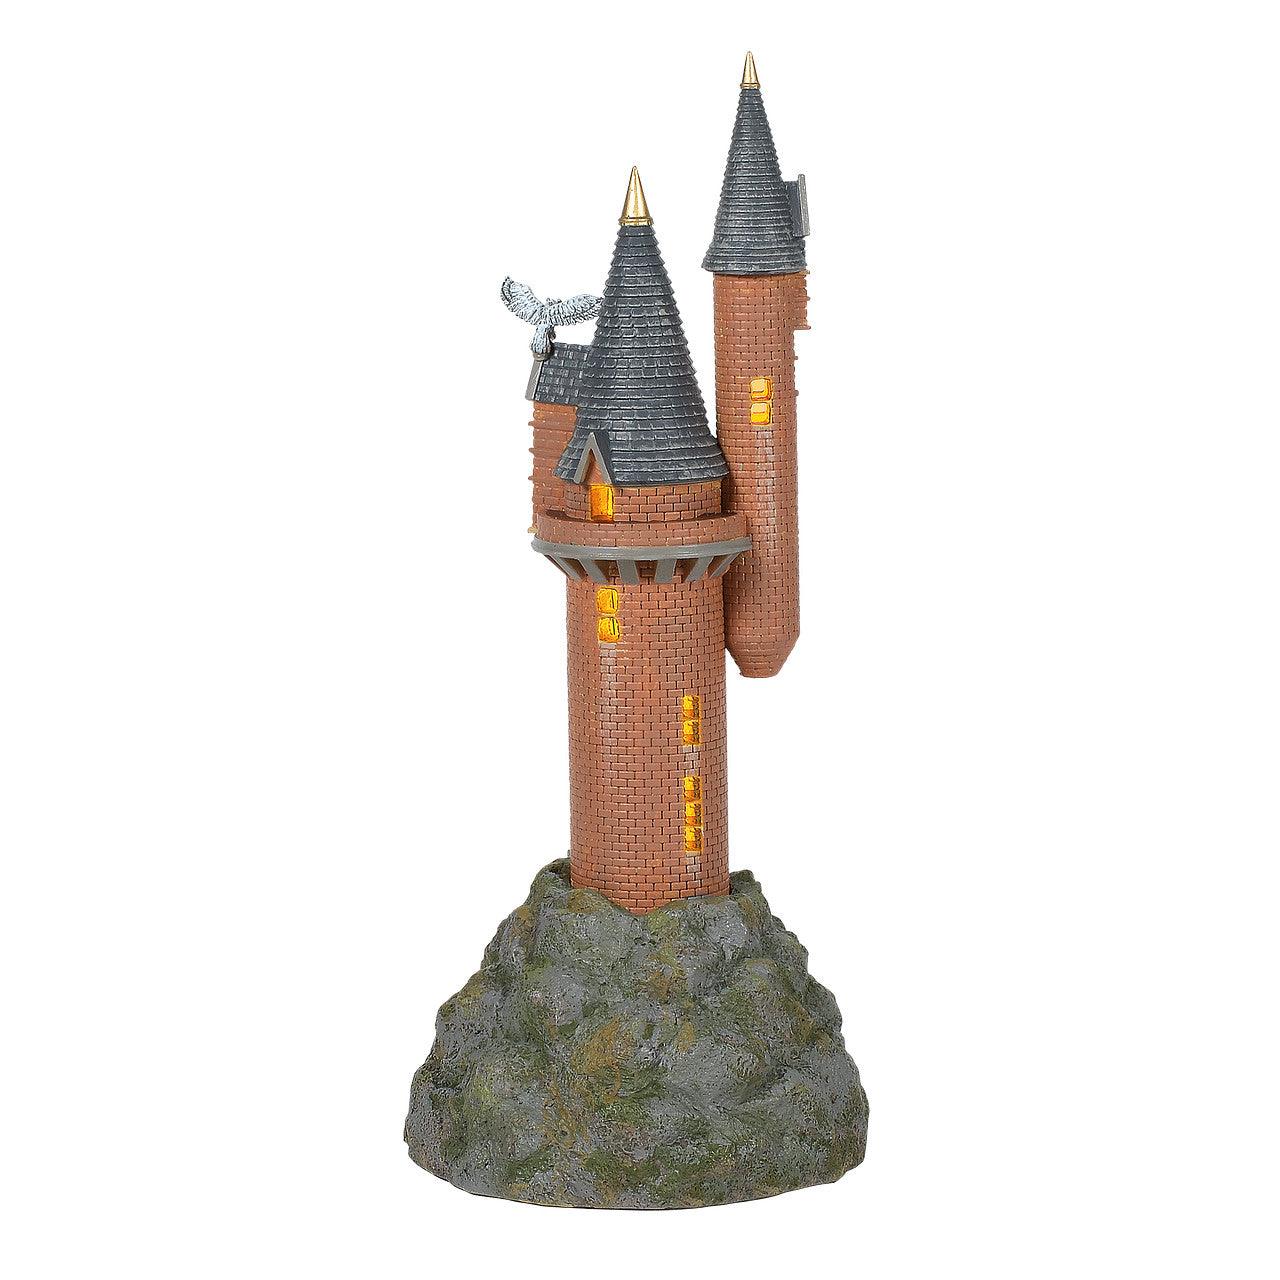 Department 56 - The Owlery Tower - KleinLand